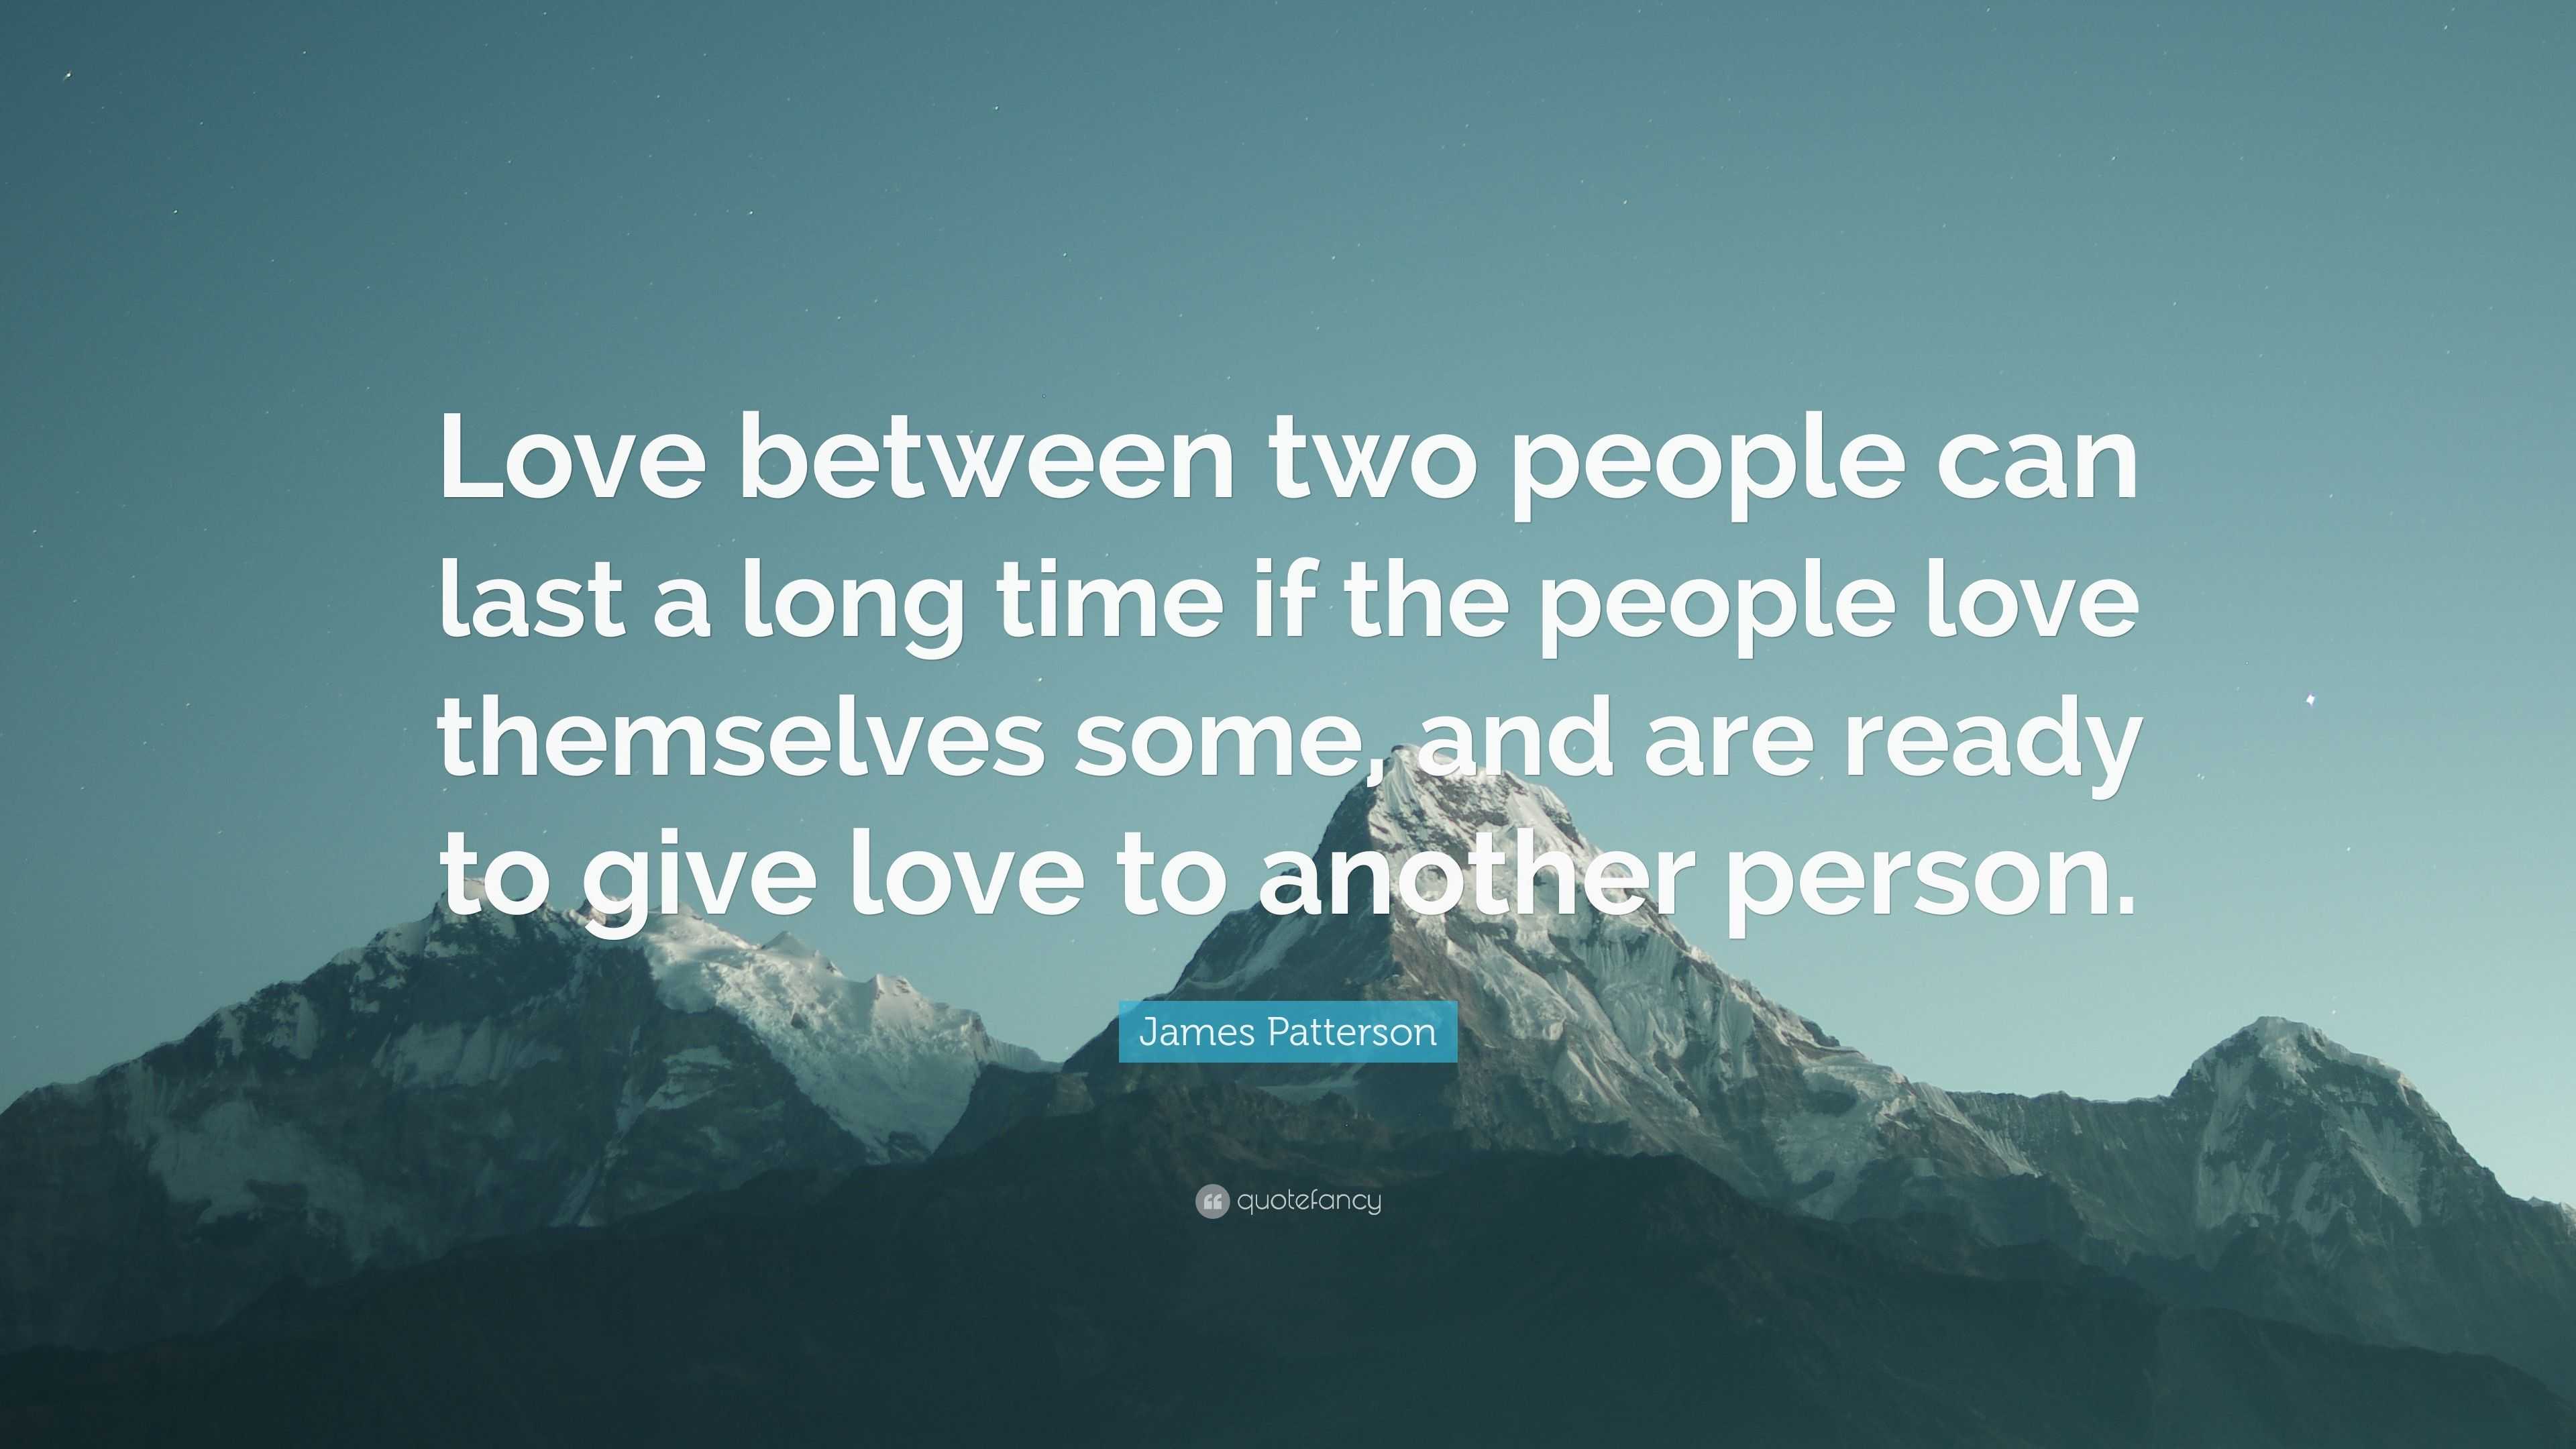 James Patterson Quote “Love between two people can last a long time if the